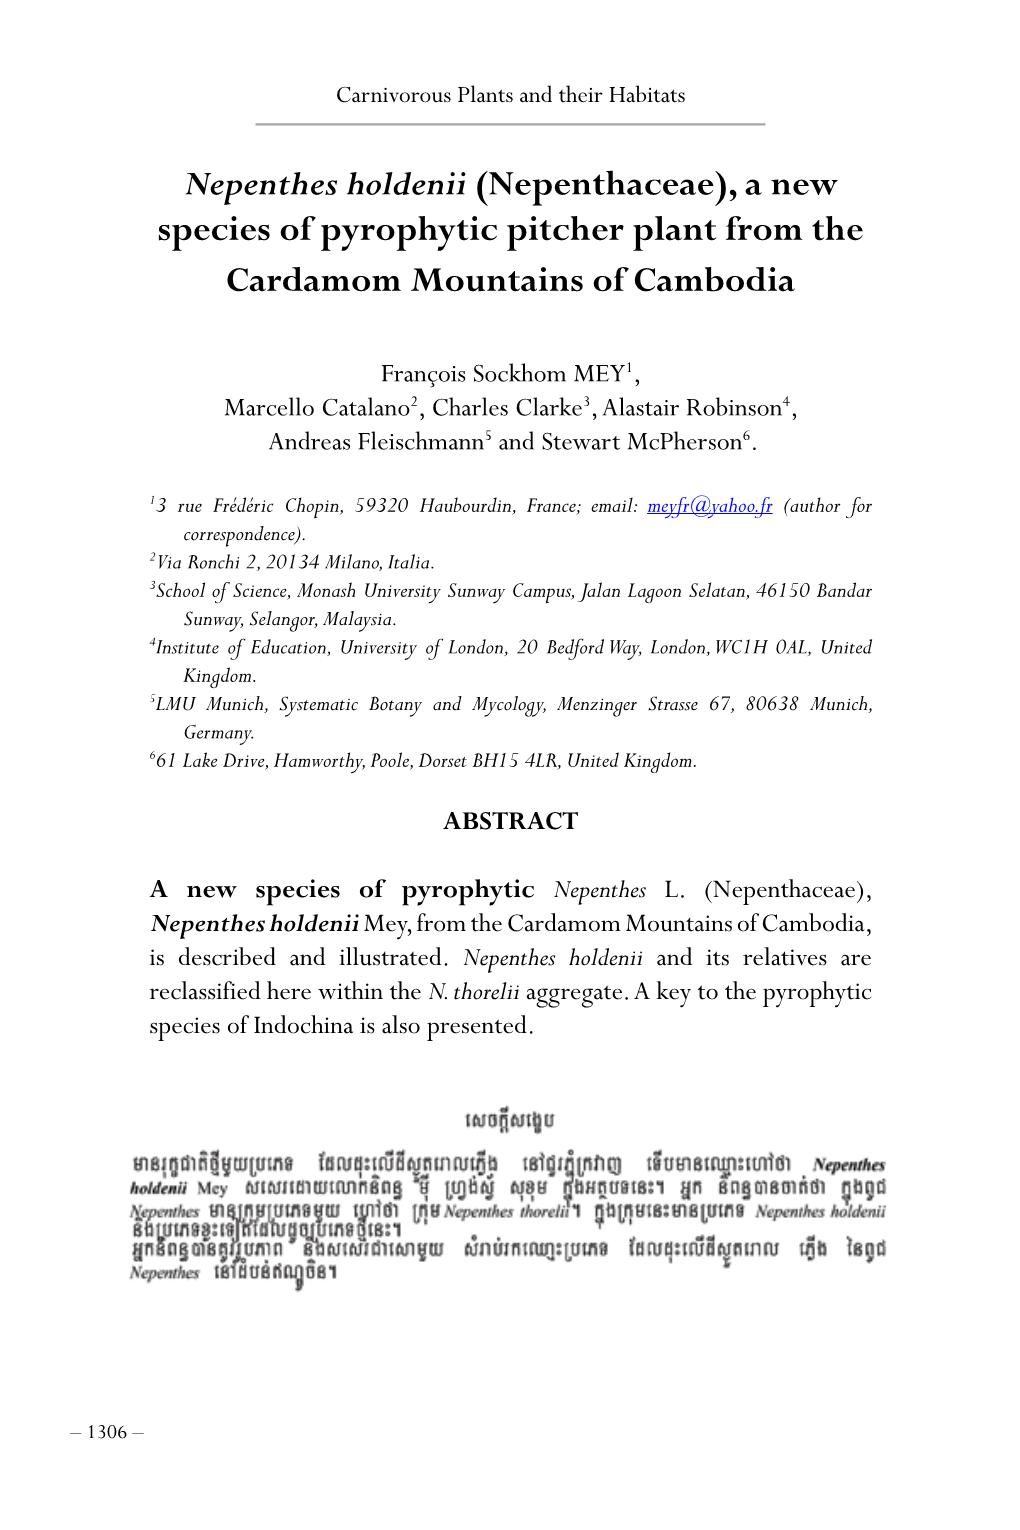 Nepenthes Holdenii (Nepenthaceae), a New Species of Pyrophytic Pitcher Plant from the Cardamom Mountains of Cambodia